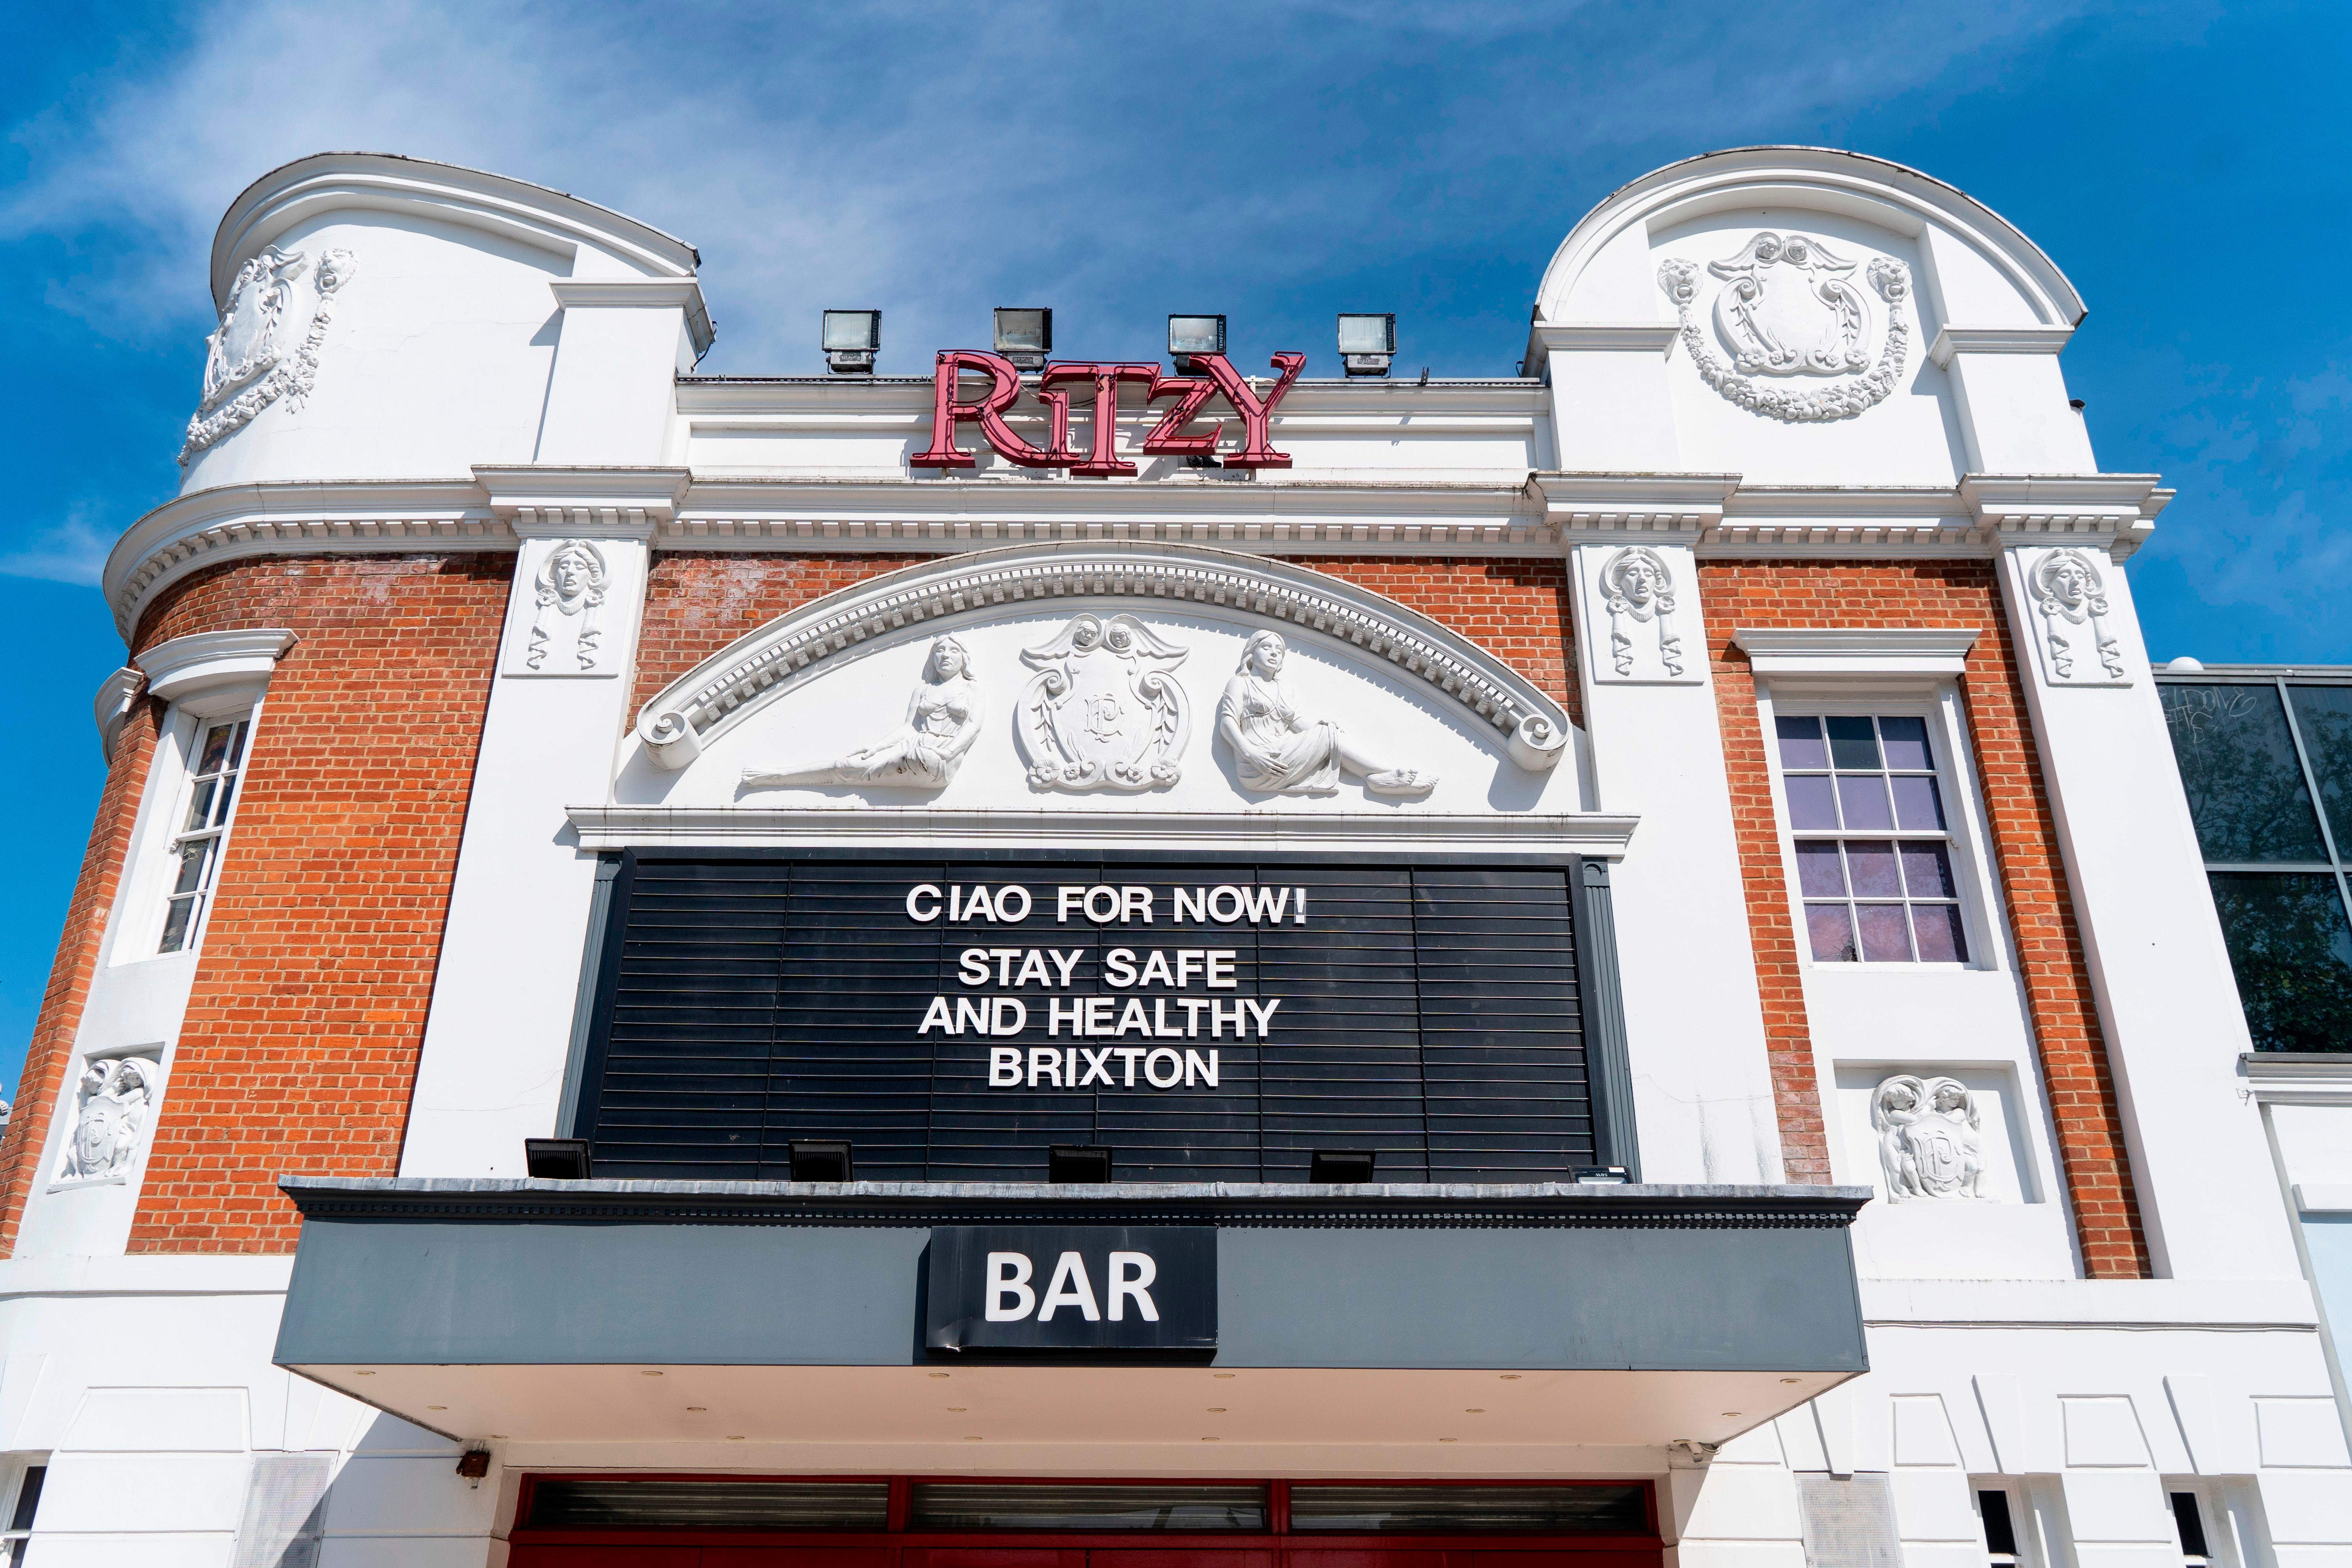 The Ritzy in Brixton, formerly the Electric Cinema, was once known for late-night showings of porn films and the latest Kung Fu movies